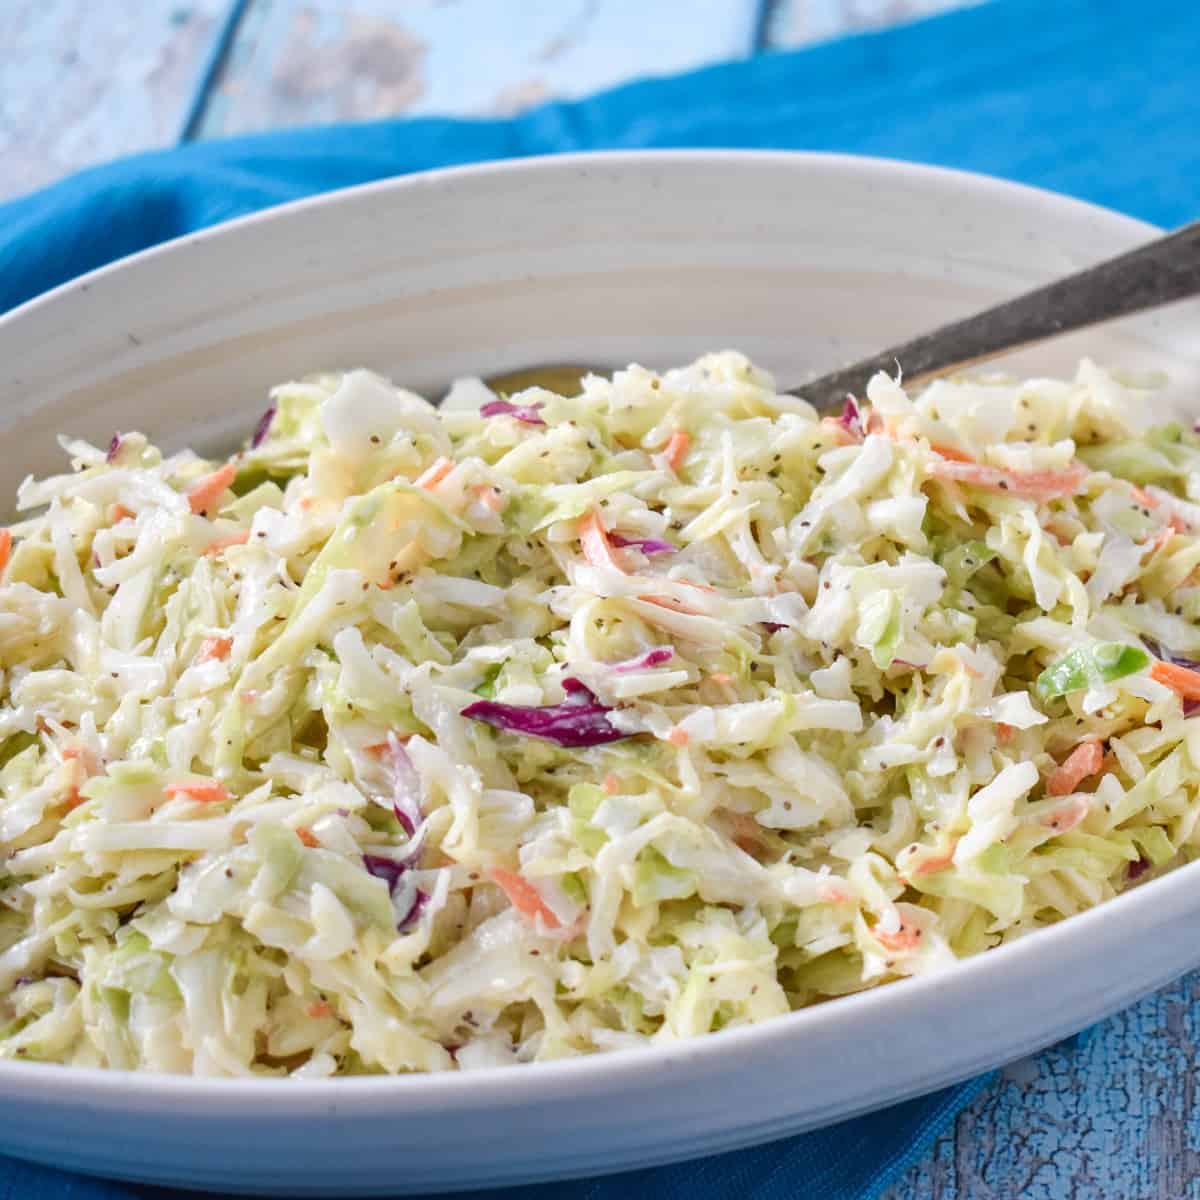 An image of the slaw served in an oval, white bowl that is set on an aqua linen.